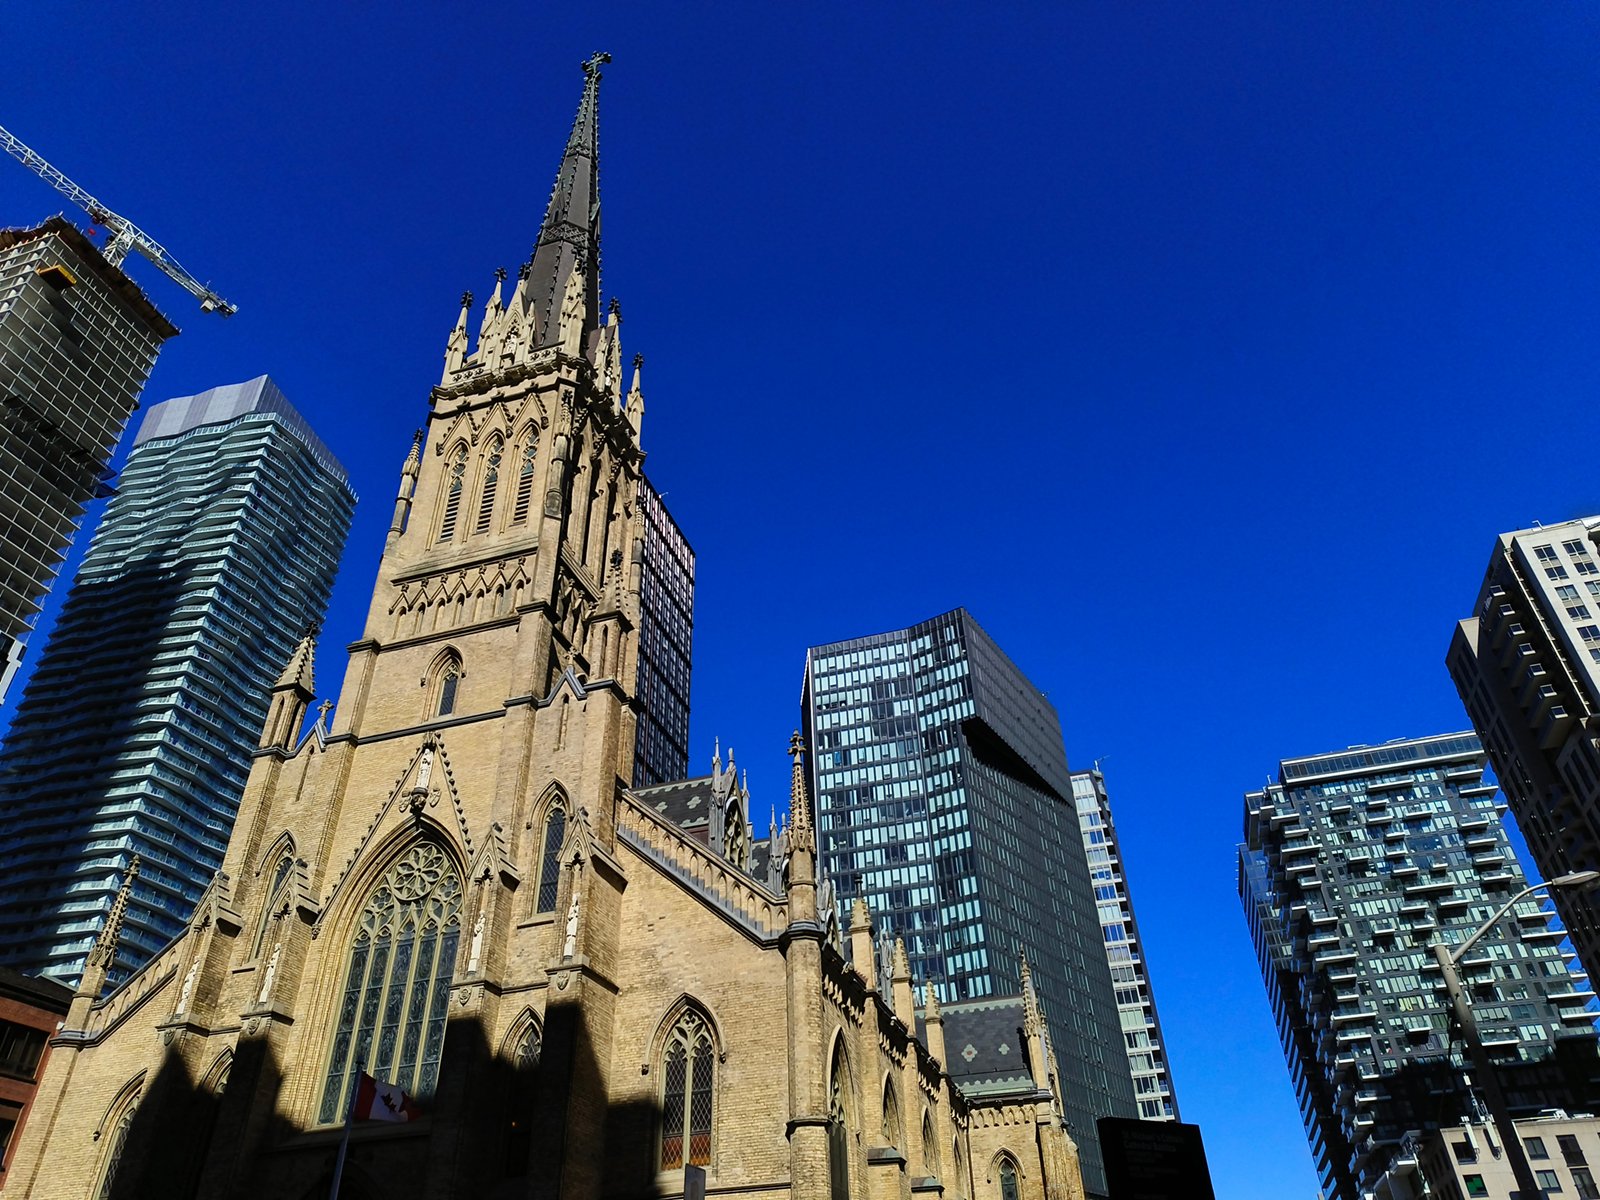 A gothic-style church with a tall spire stands prominently among modern skyscrapers under a clear blue sky.